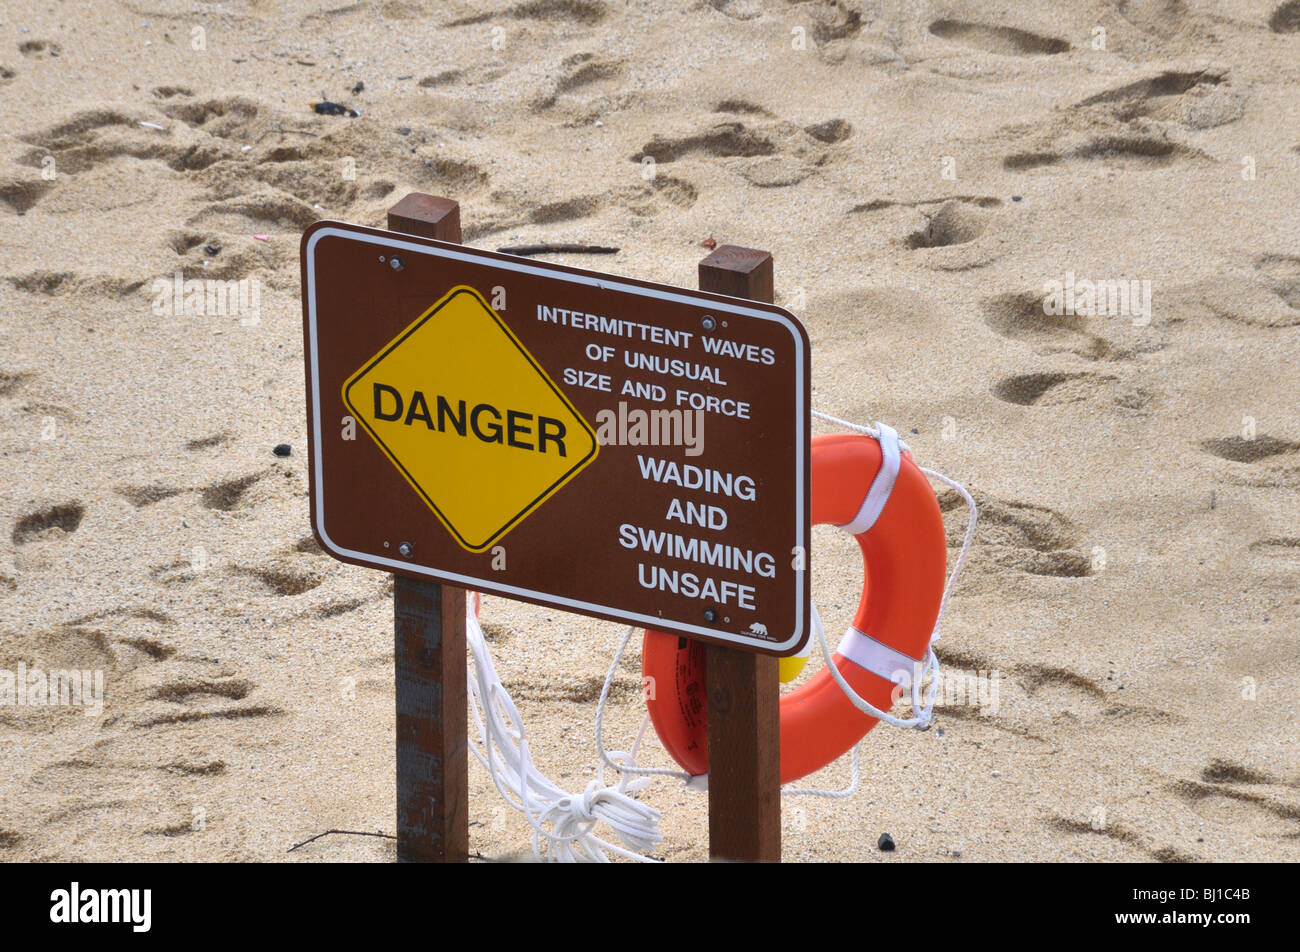 High Waves:High wave warning sign on a California Beach-'intermittent waves of unusual size, wading and swimming unsafe' Stock Photo